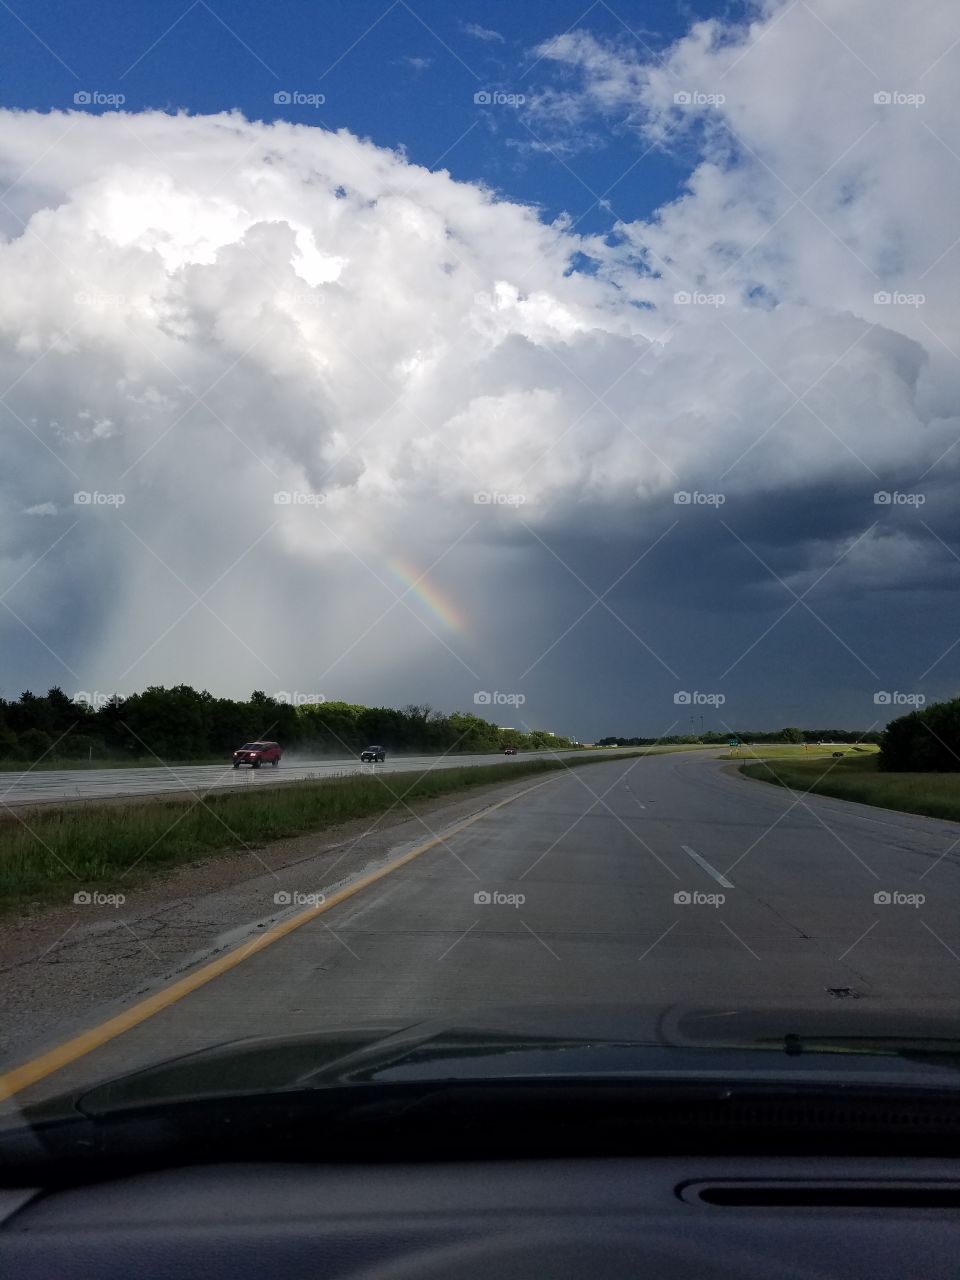 Rainbow in the Storm